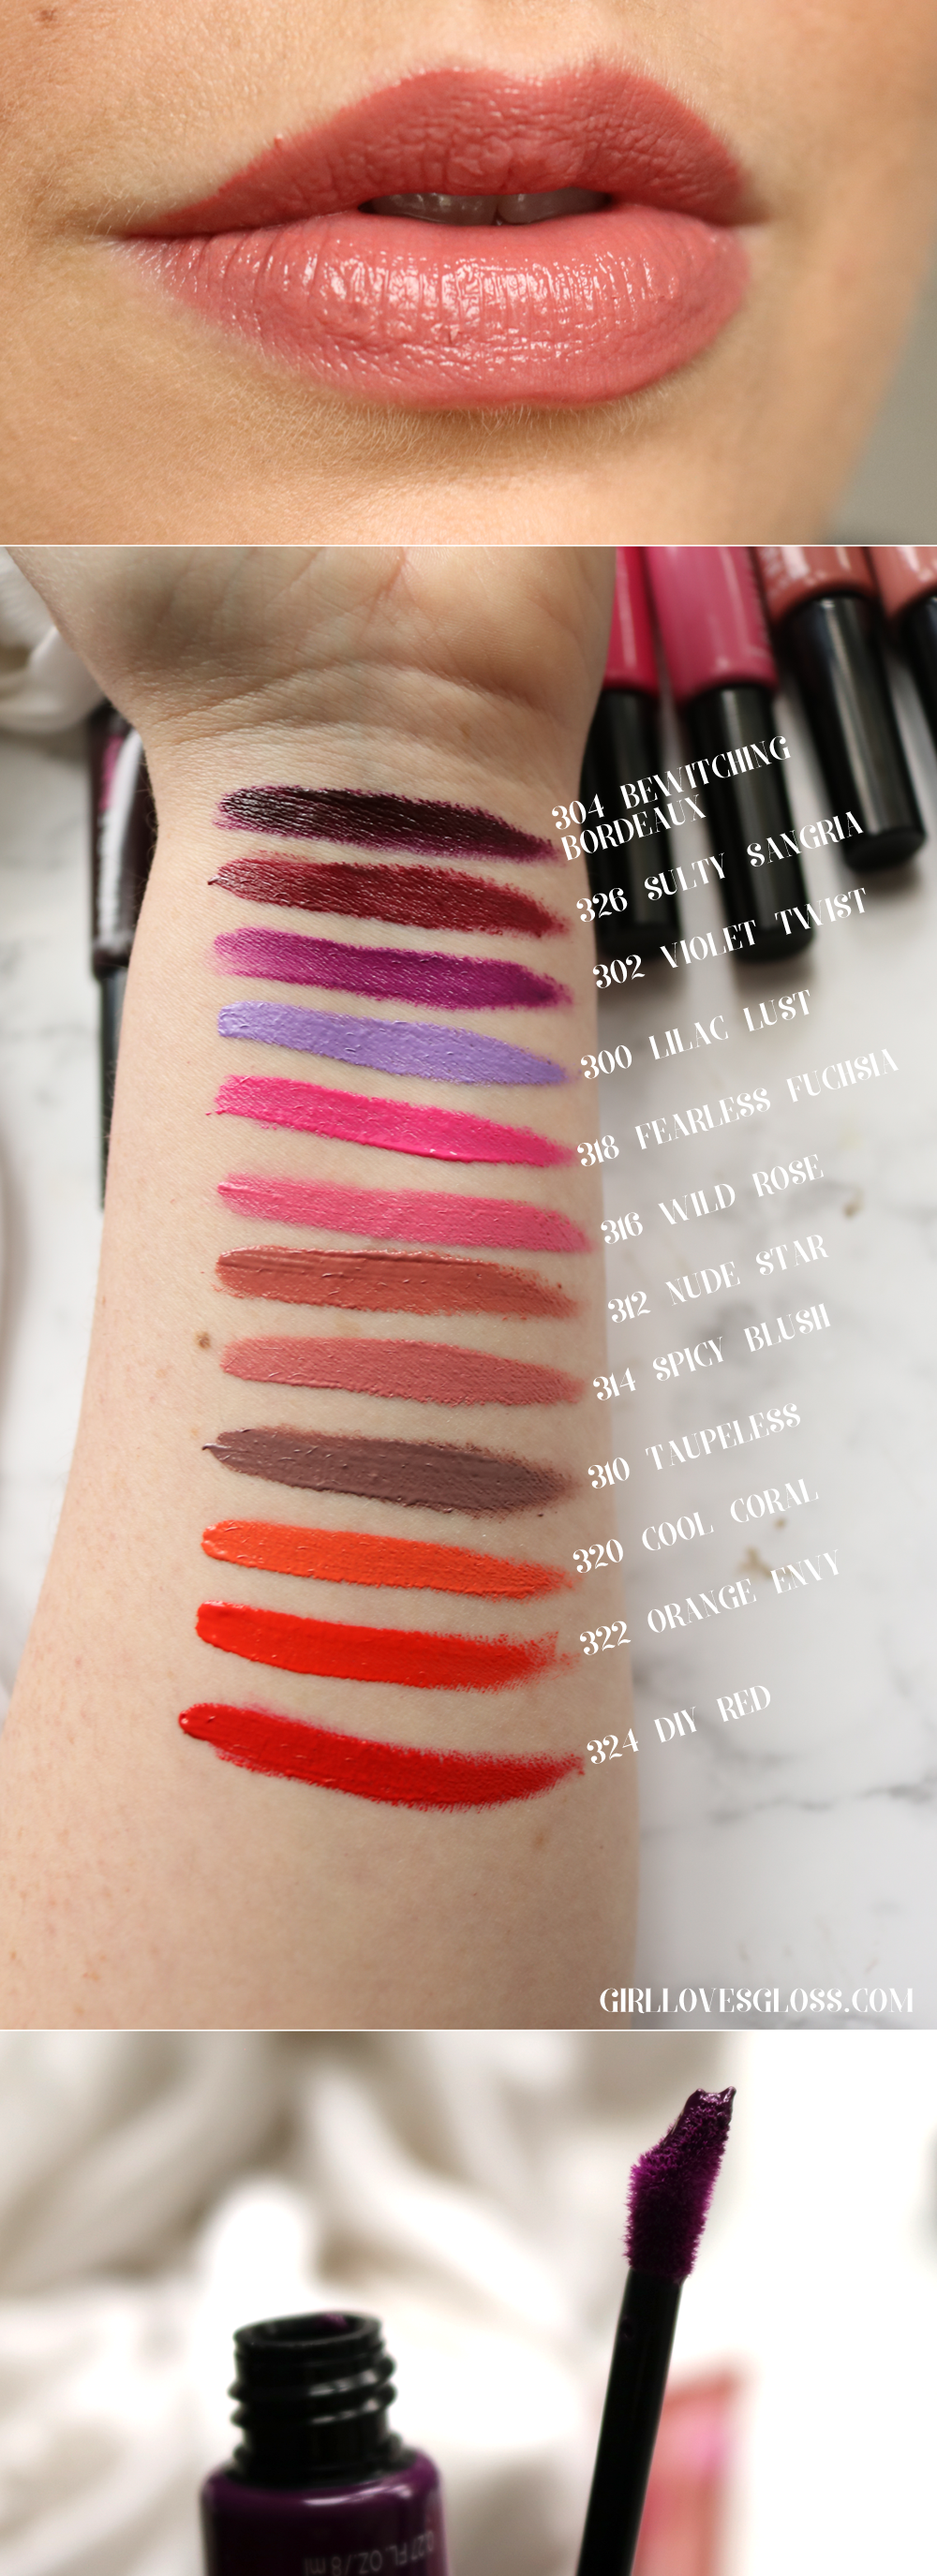 Loreal Infallible Paints for Lips Review and Swatches